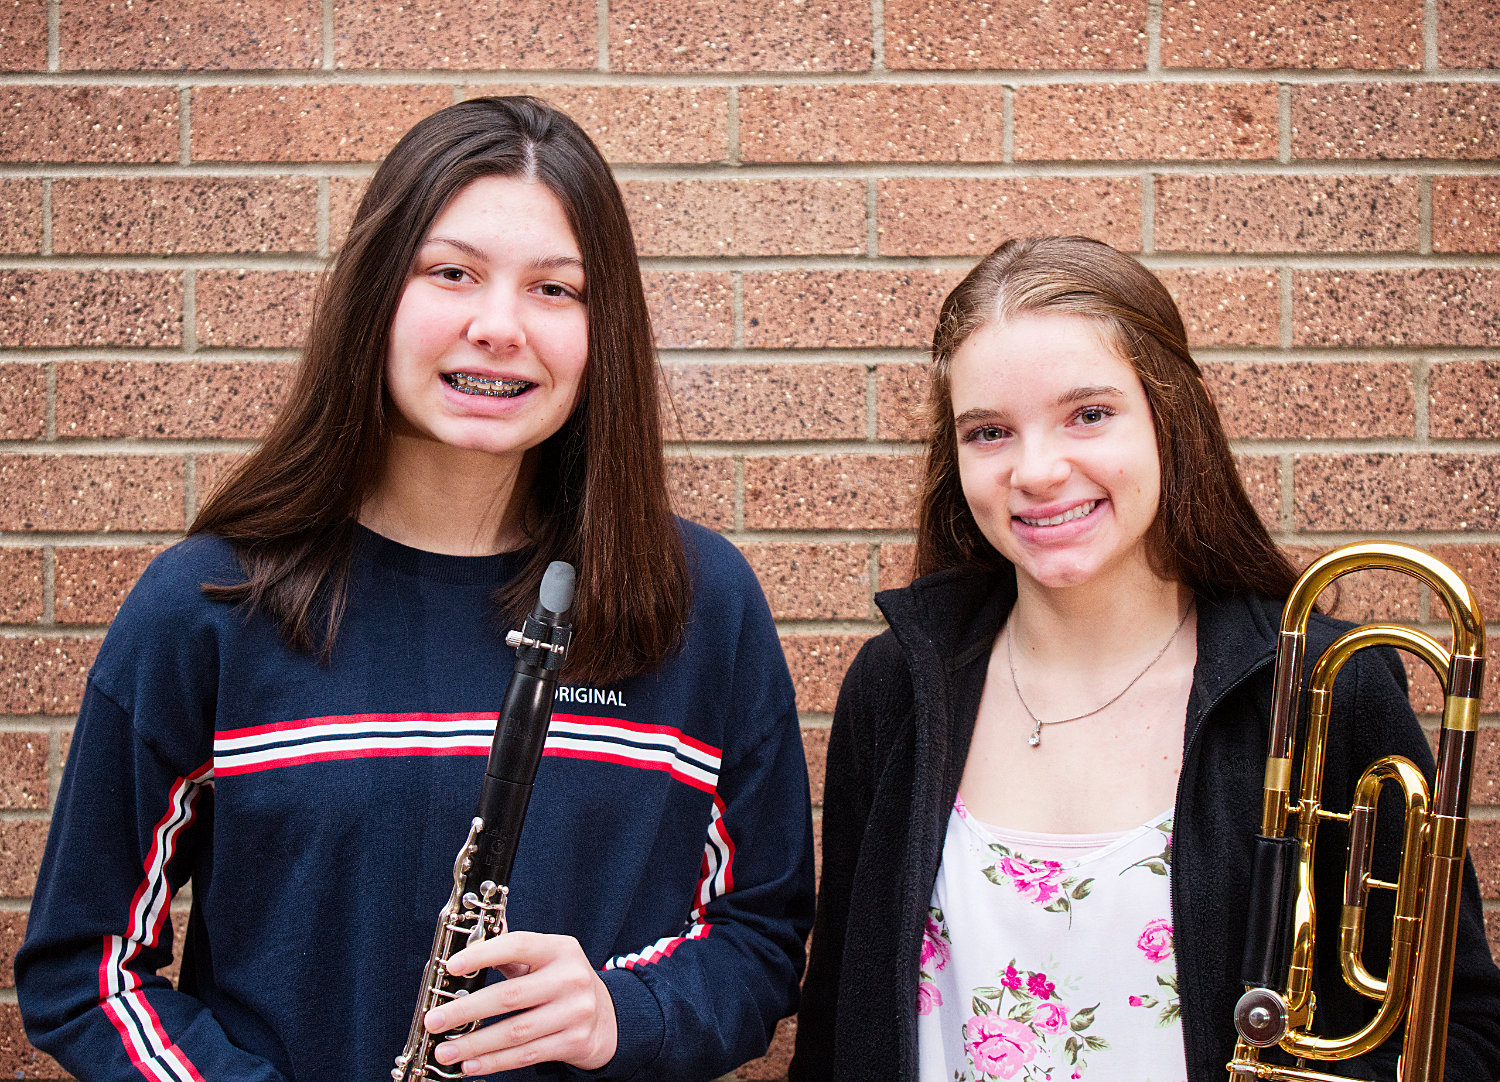 Ellery D’Angelo, left, and Megan Holt, members of the Mineola High School band, have earned places in the all-state band.